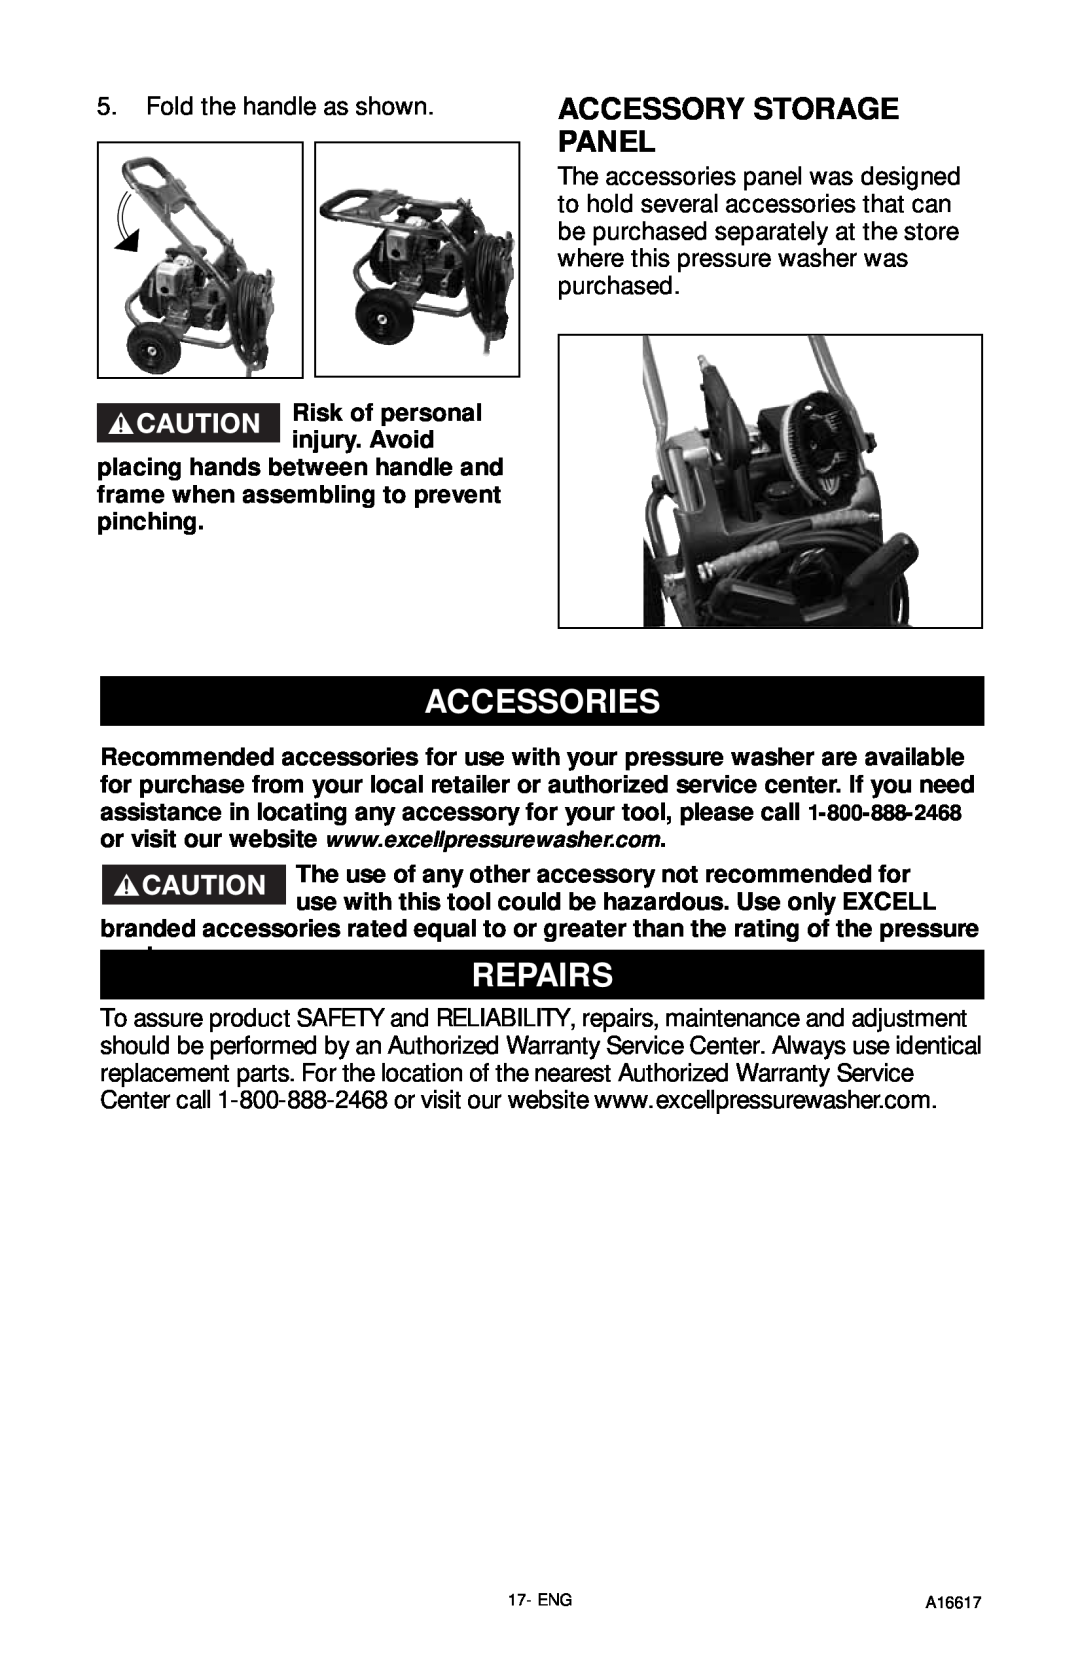 DeVillbiss Air Power Company A16617, XR2625 operation manual Accessories, Repairs, Accessory Storage Panel 